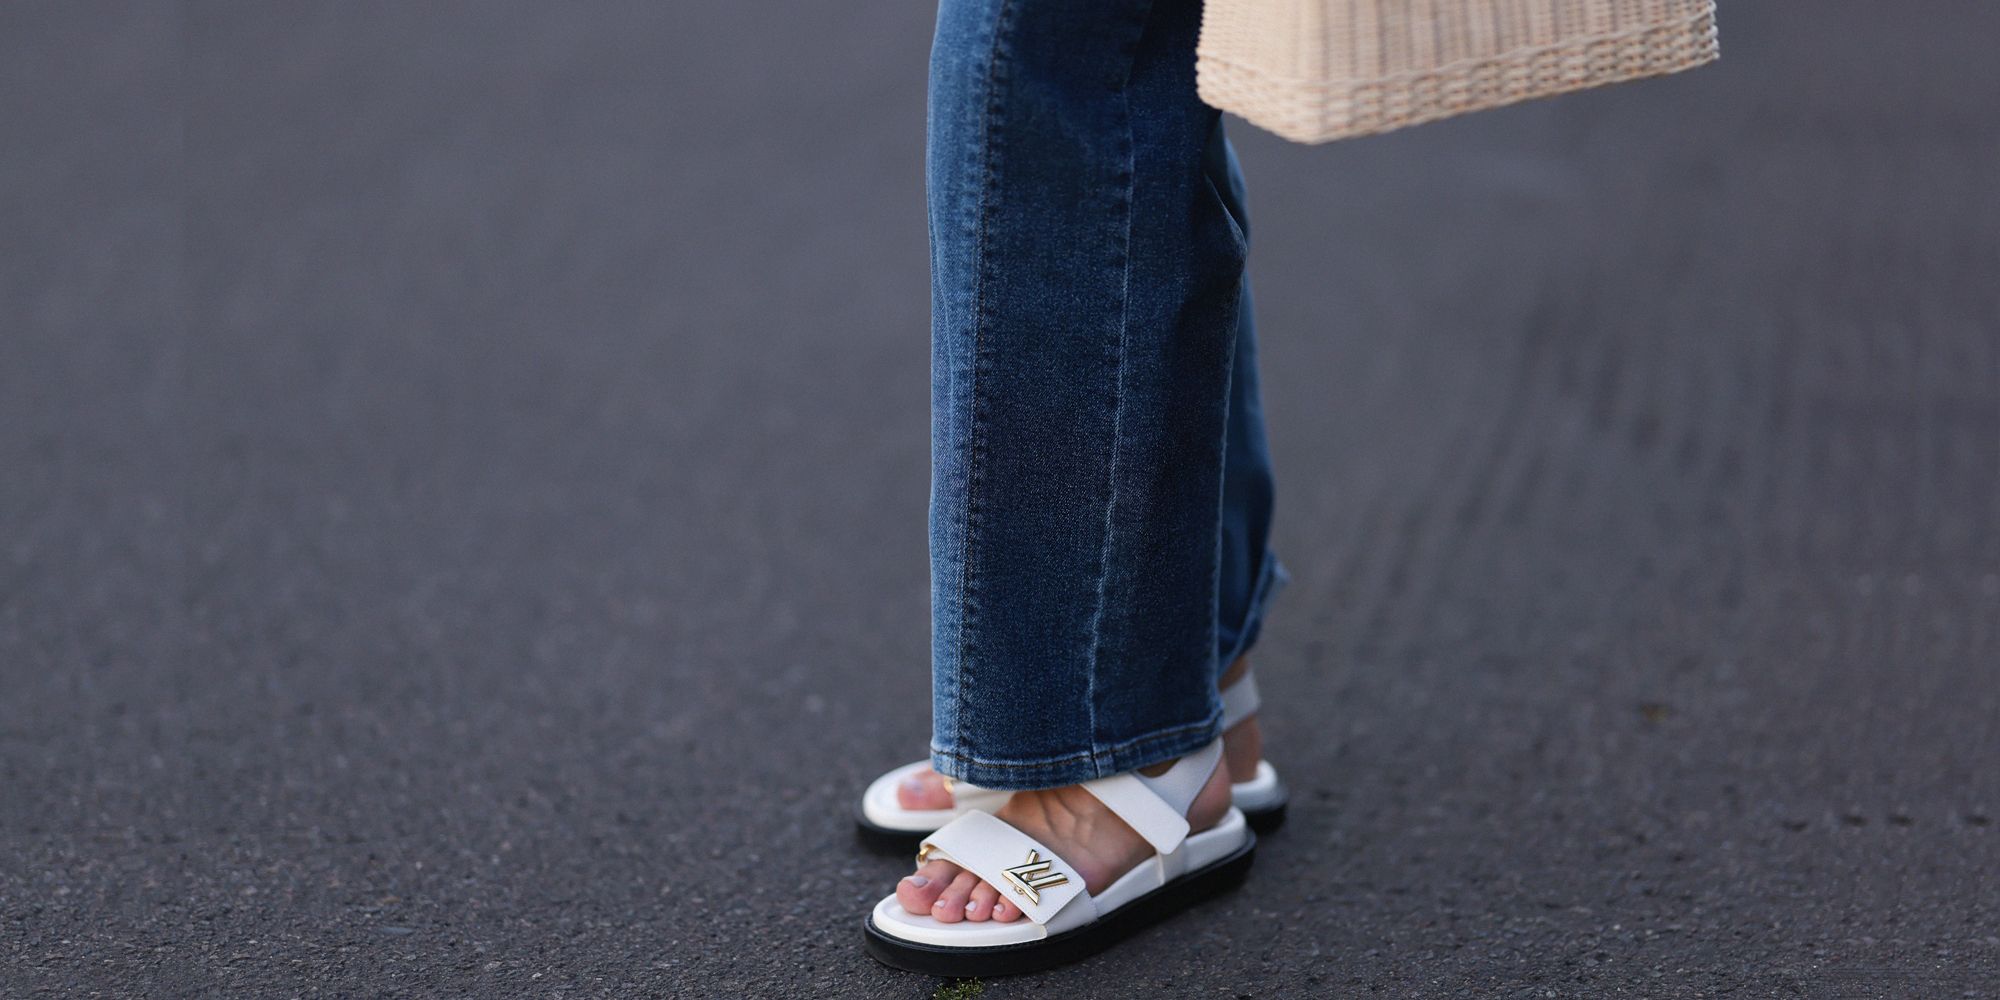 23 Best Arch Support Shoes for Long Days on Your Feet | Condé Nast Traveler